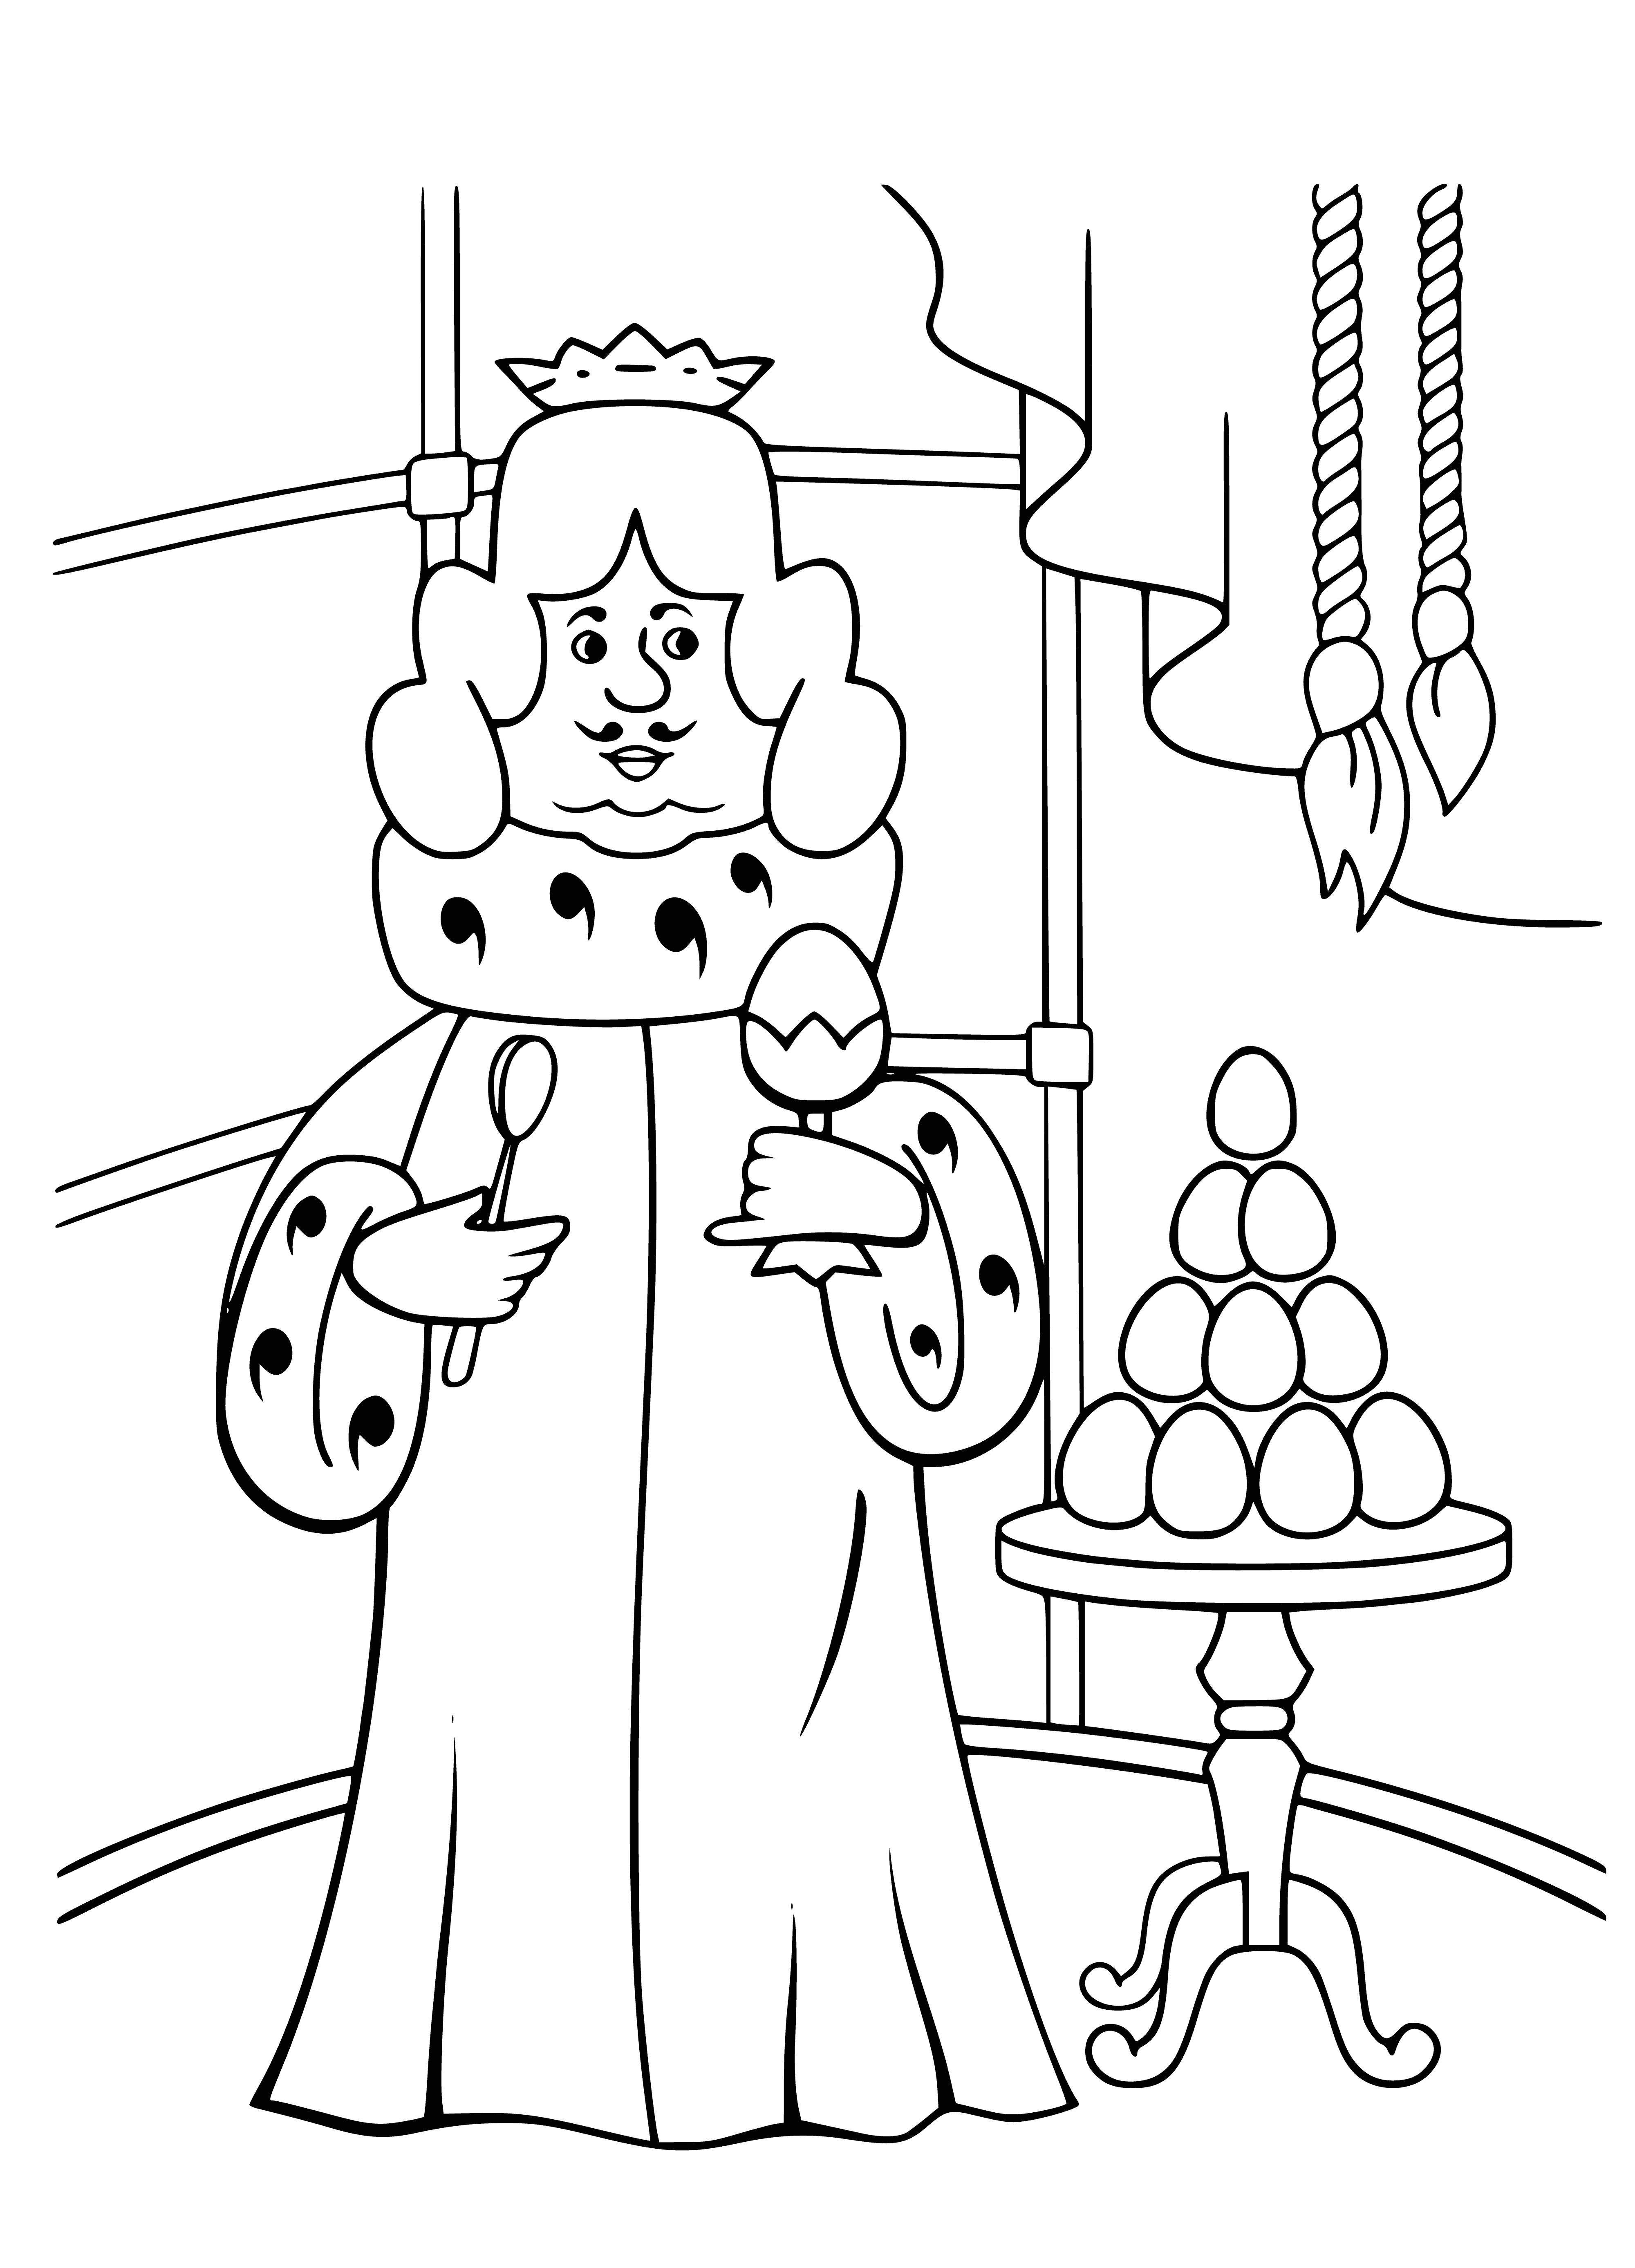 coloring page: King plays guitar, wears gold crown & purple cape while performing on stage. A crowd watches. #TheBremenTownMusicians